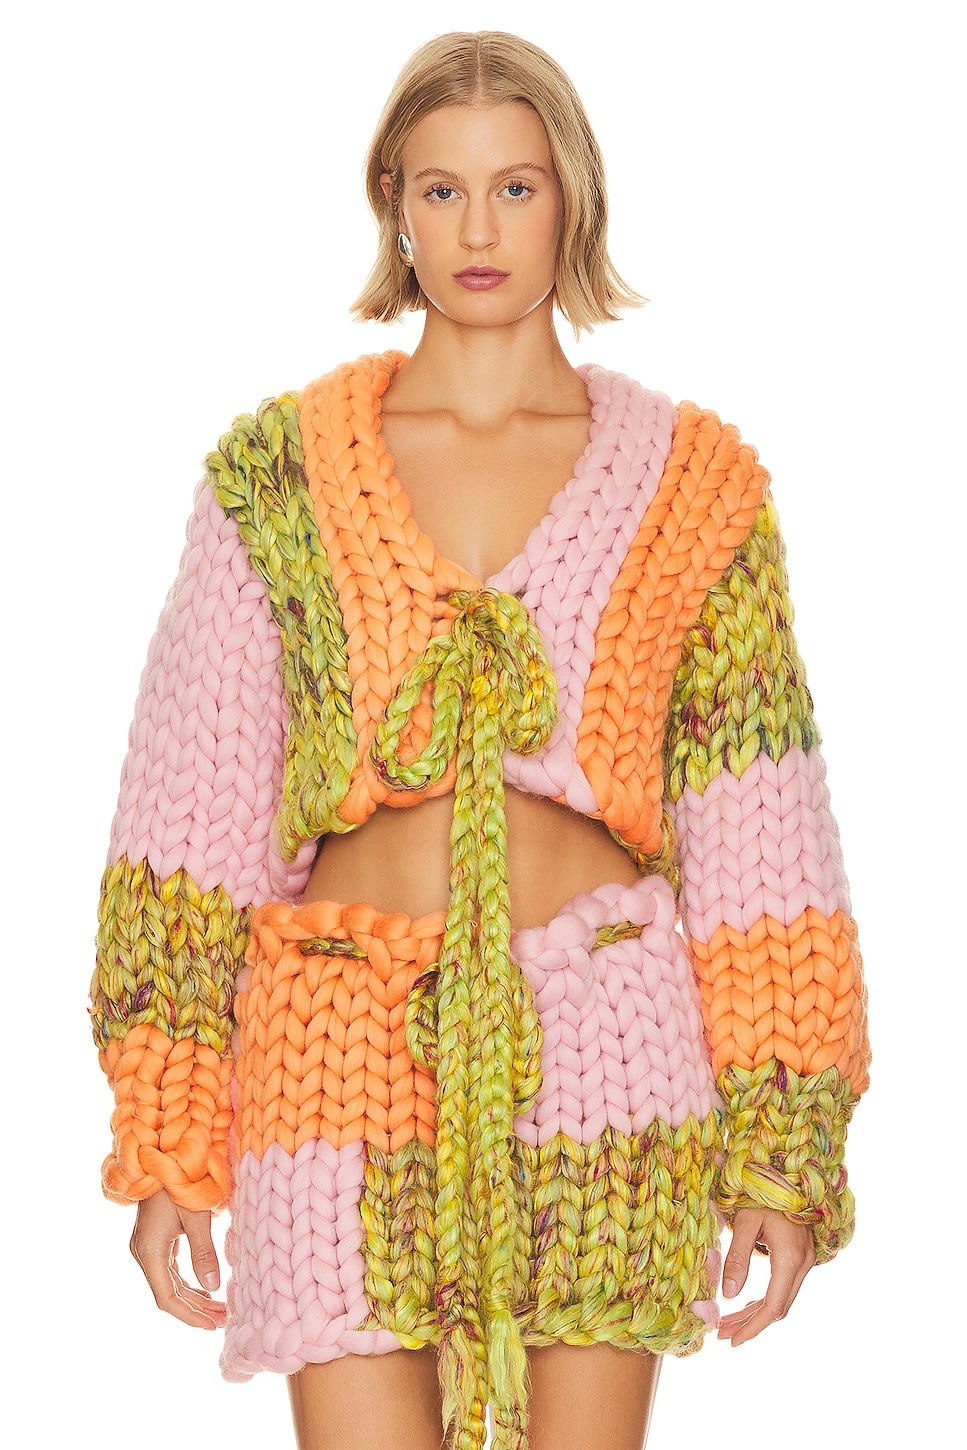 Hope Macaulay Colossal Knit Cardigan in Peas & Carrots